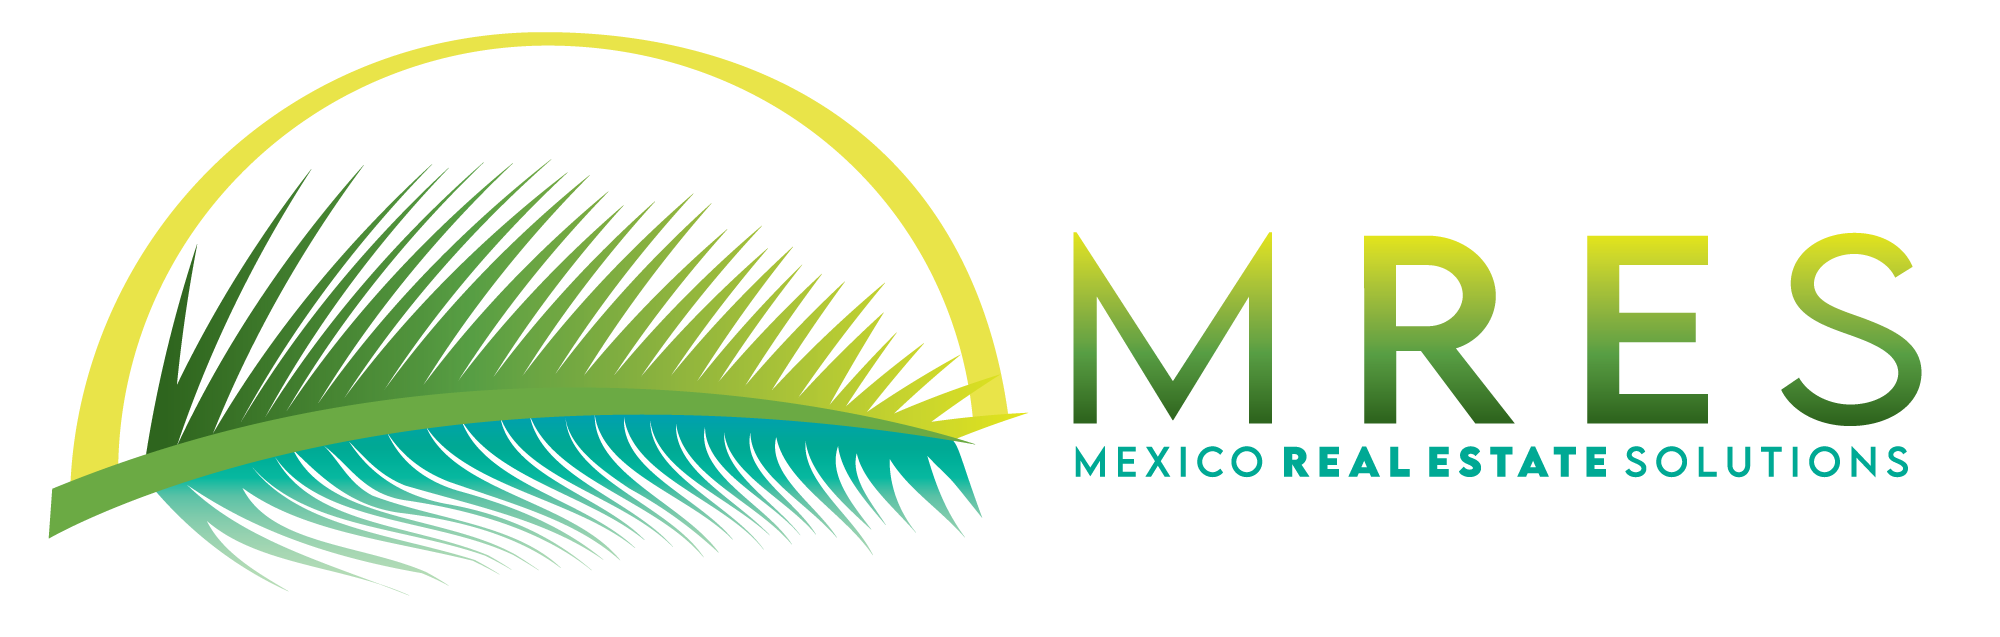 Mexico Real Estate Solutions